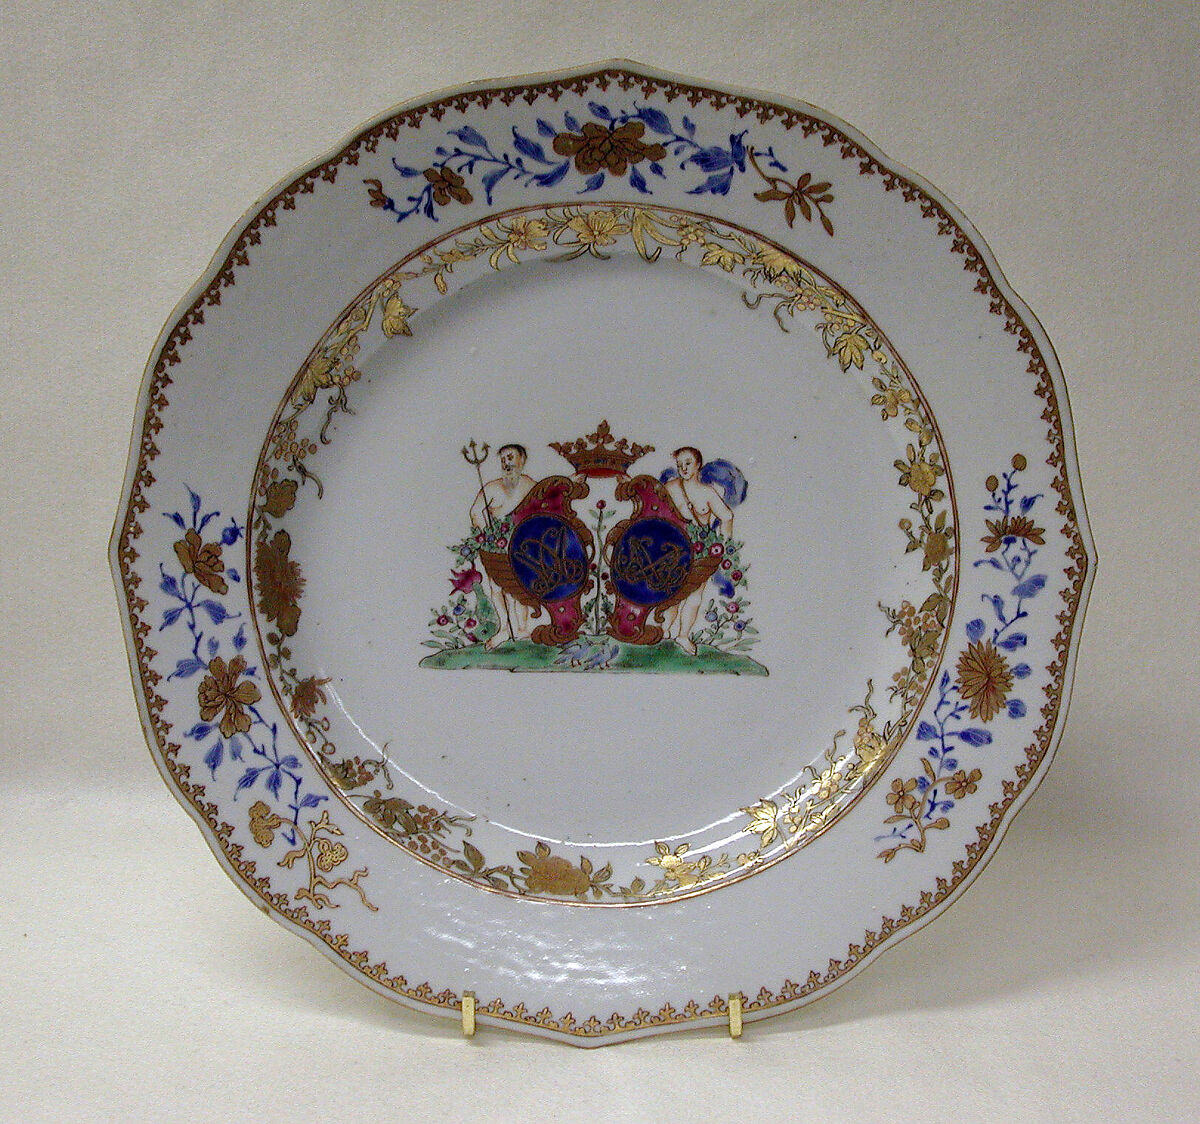 Plate (part of a service), Hard-paste porcelain, Chinese, for Danish market 